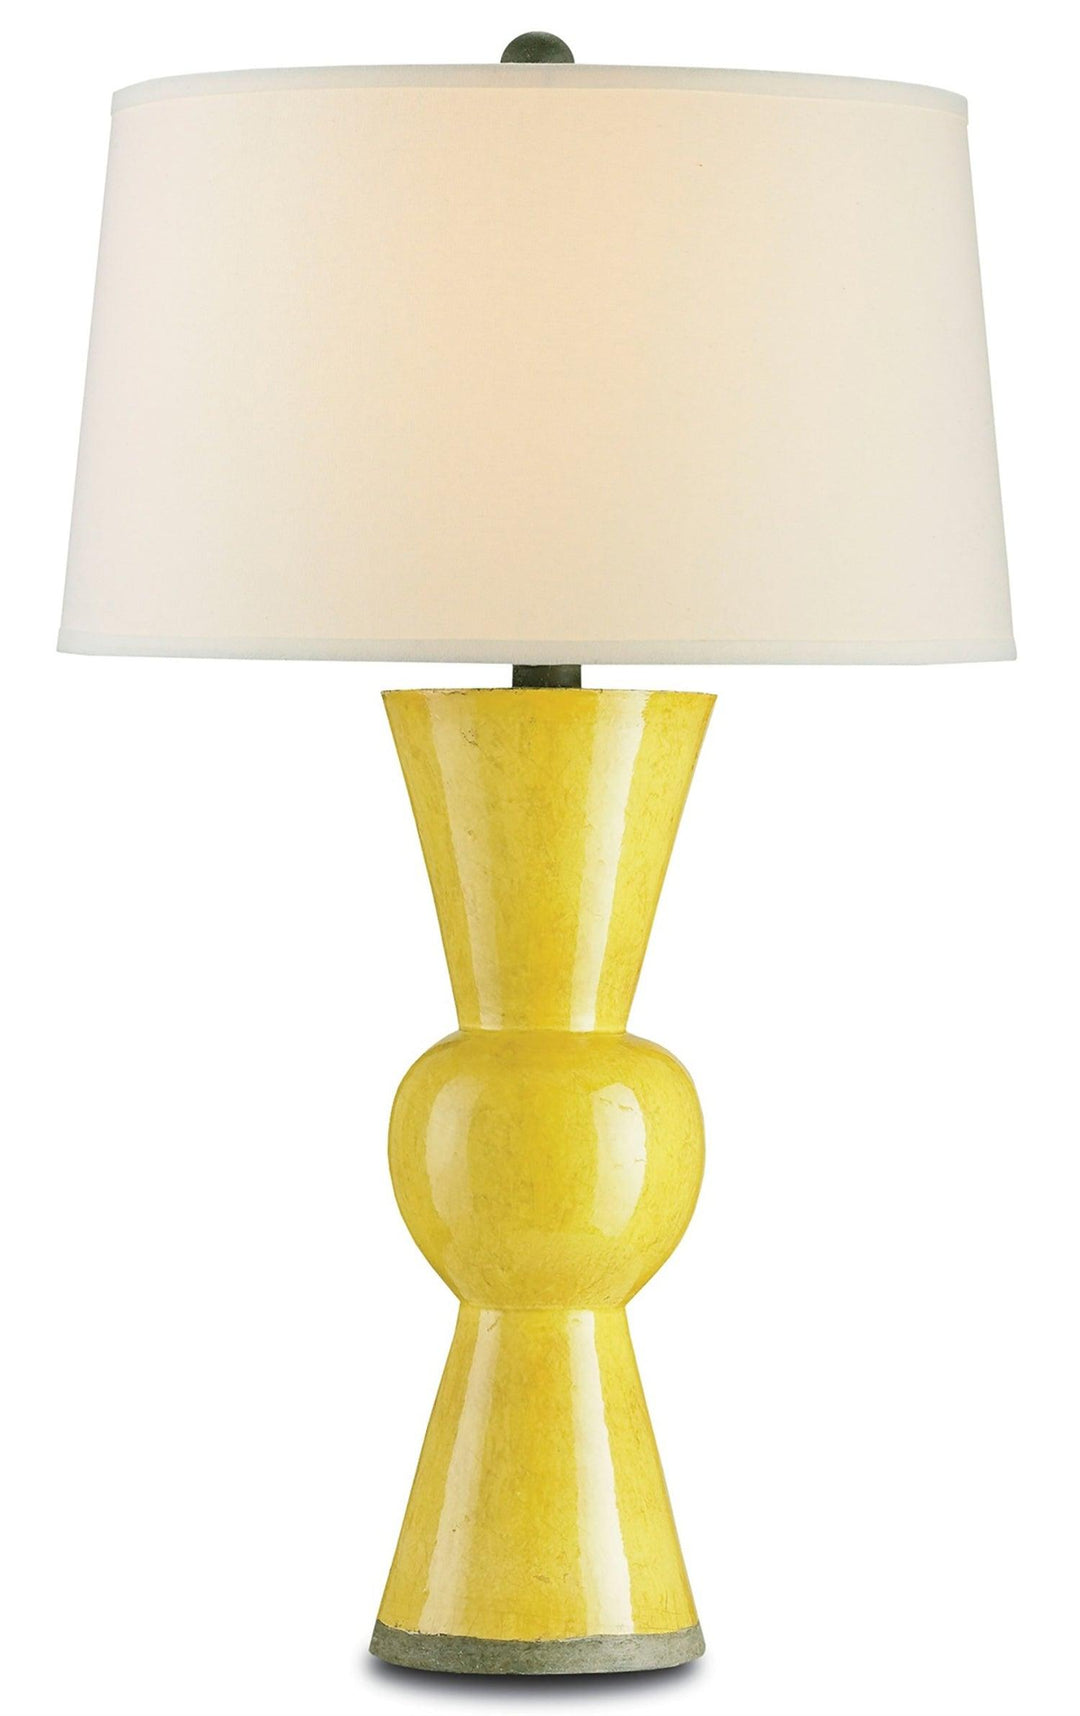 Upbeat Yellow Table Lamp - Casey & Company